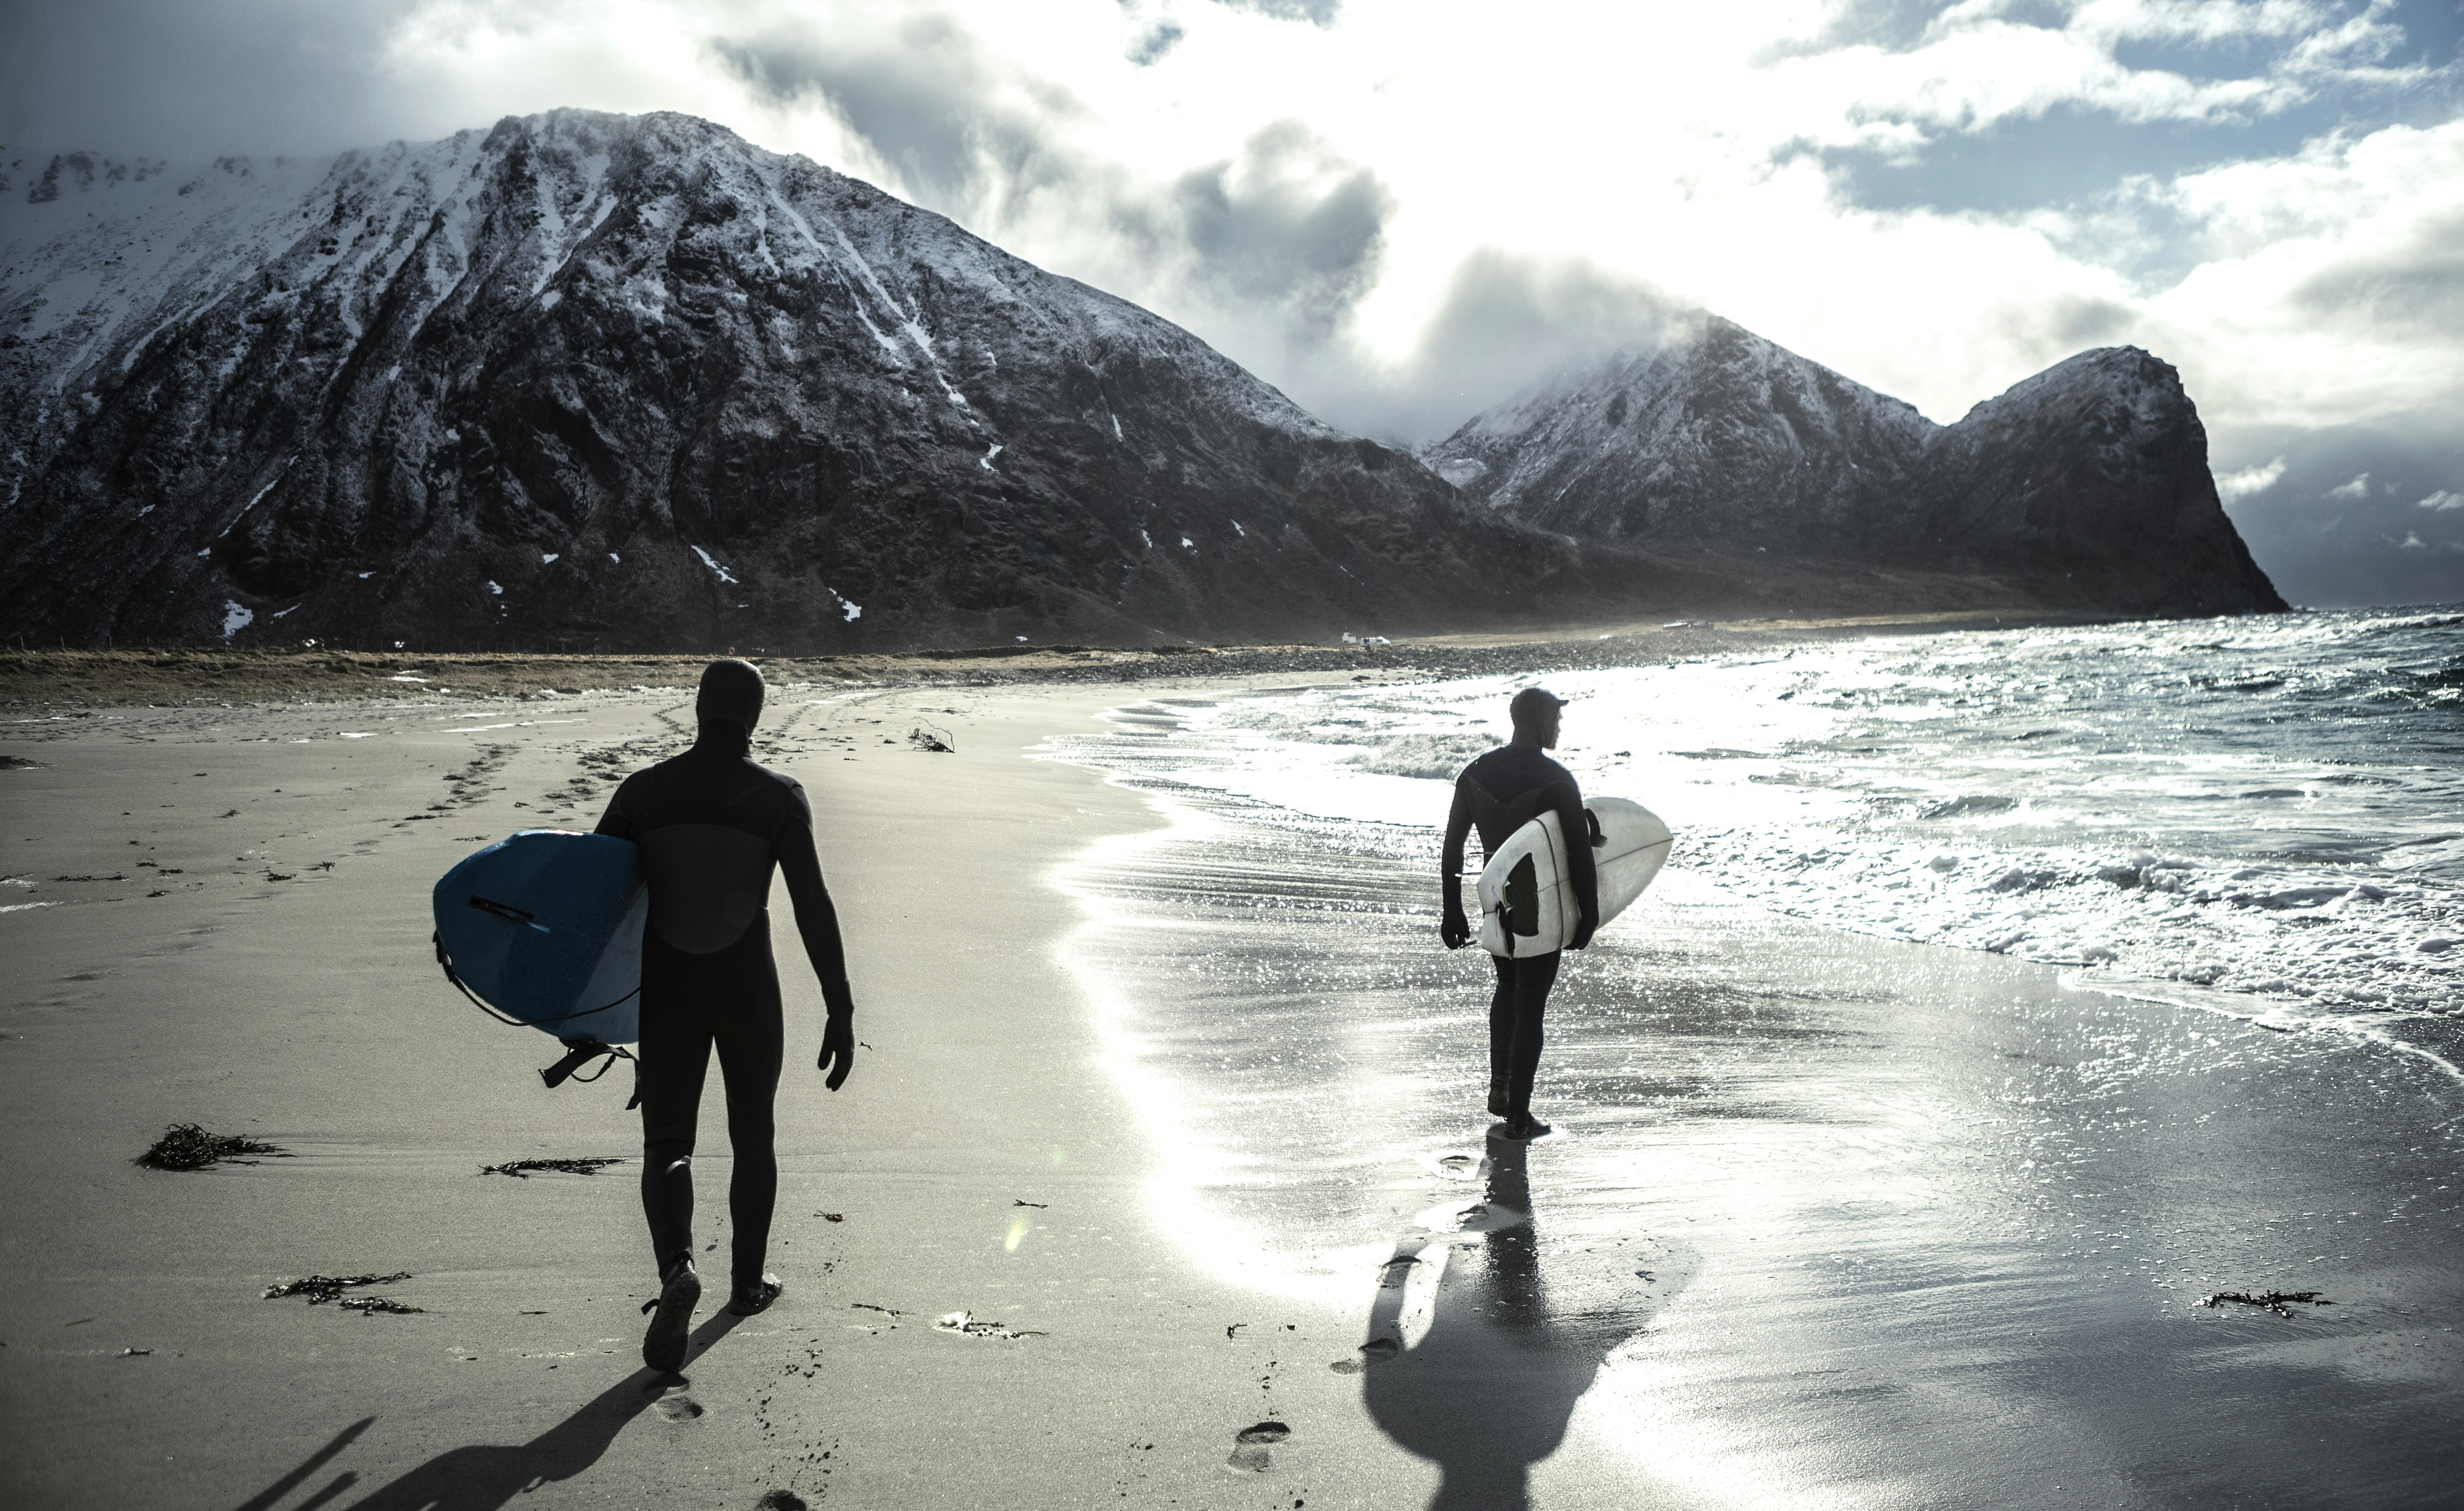 Two surfers wearing wetsuits and carrying surfboards walk along a beach in Norway with snow-capped mountains behind.